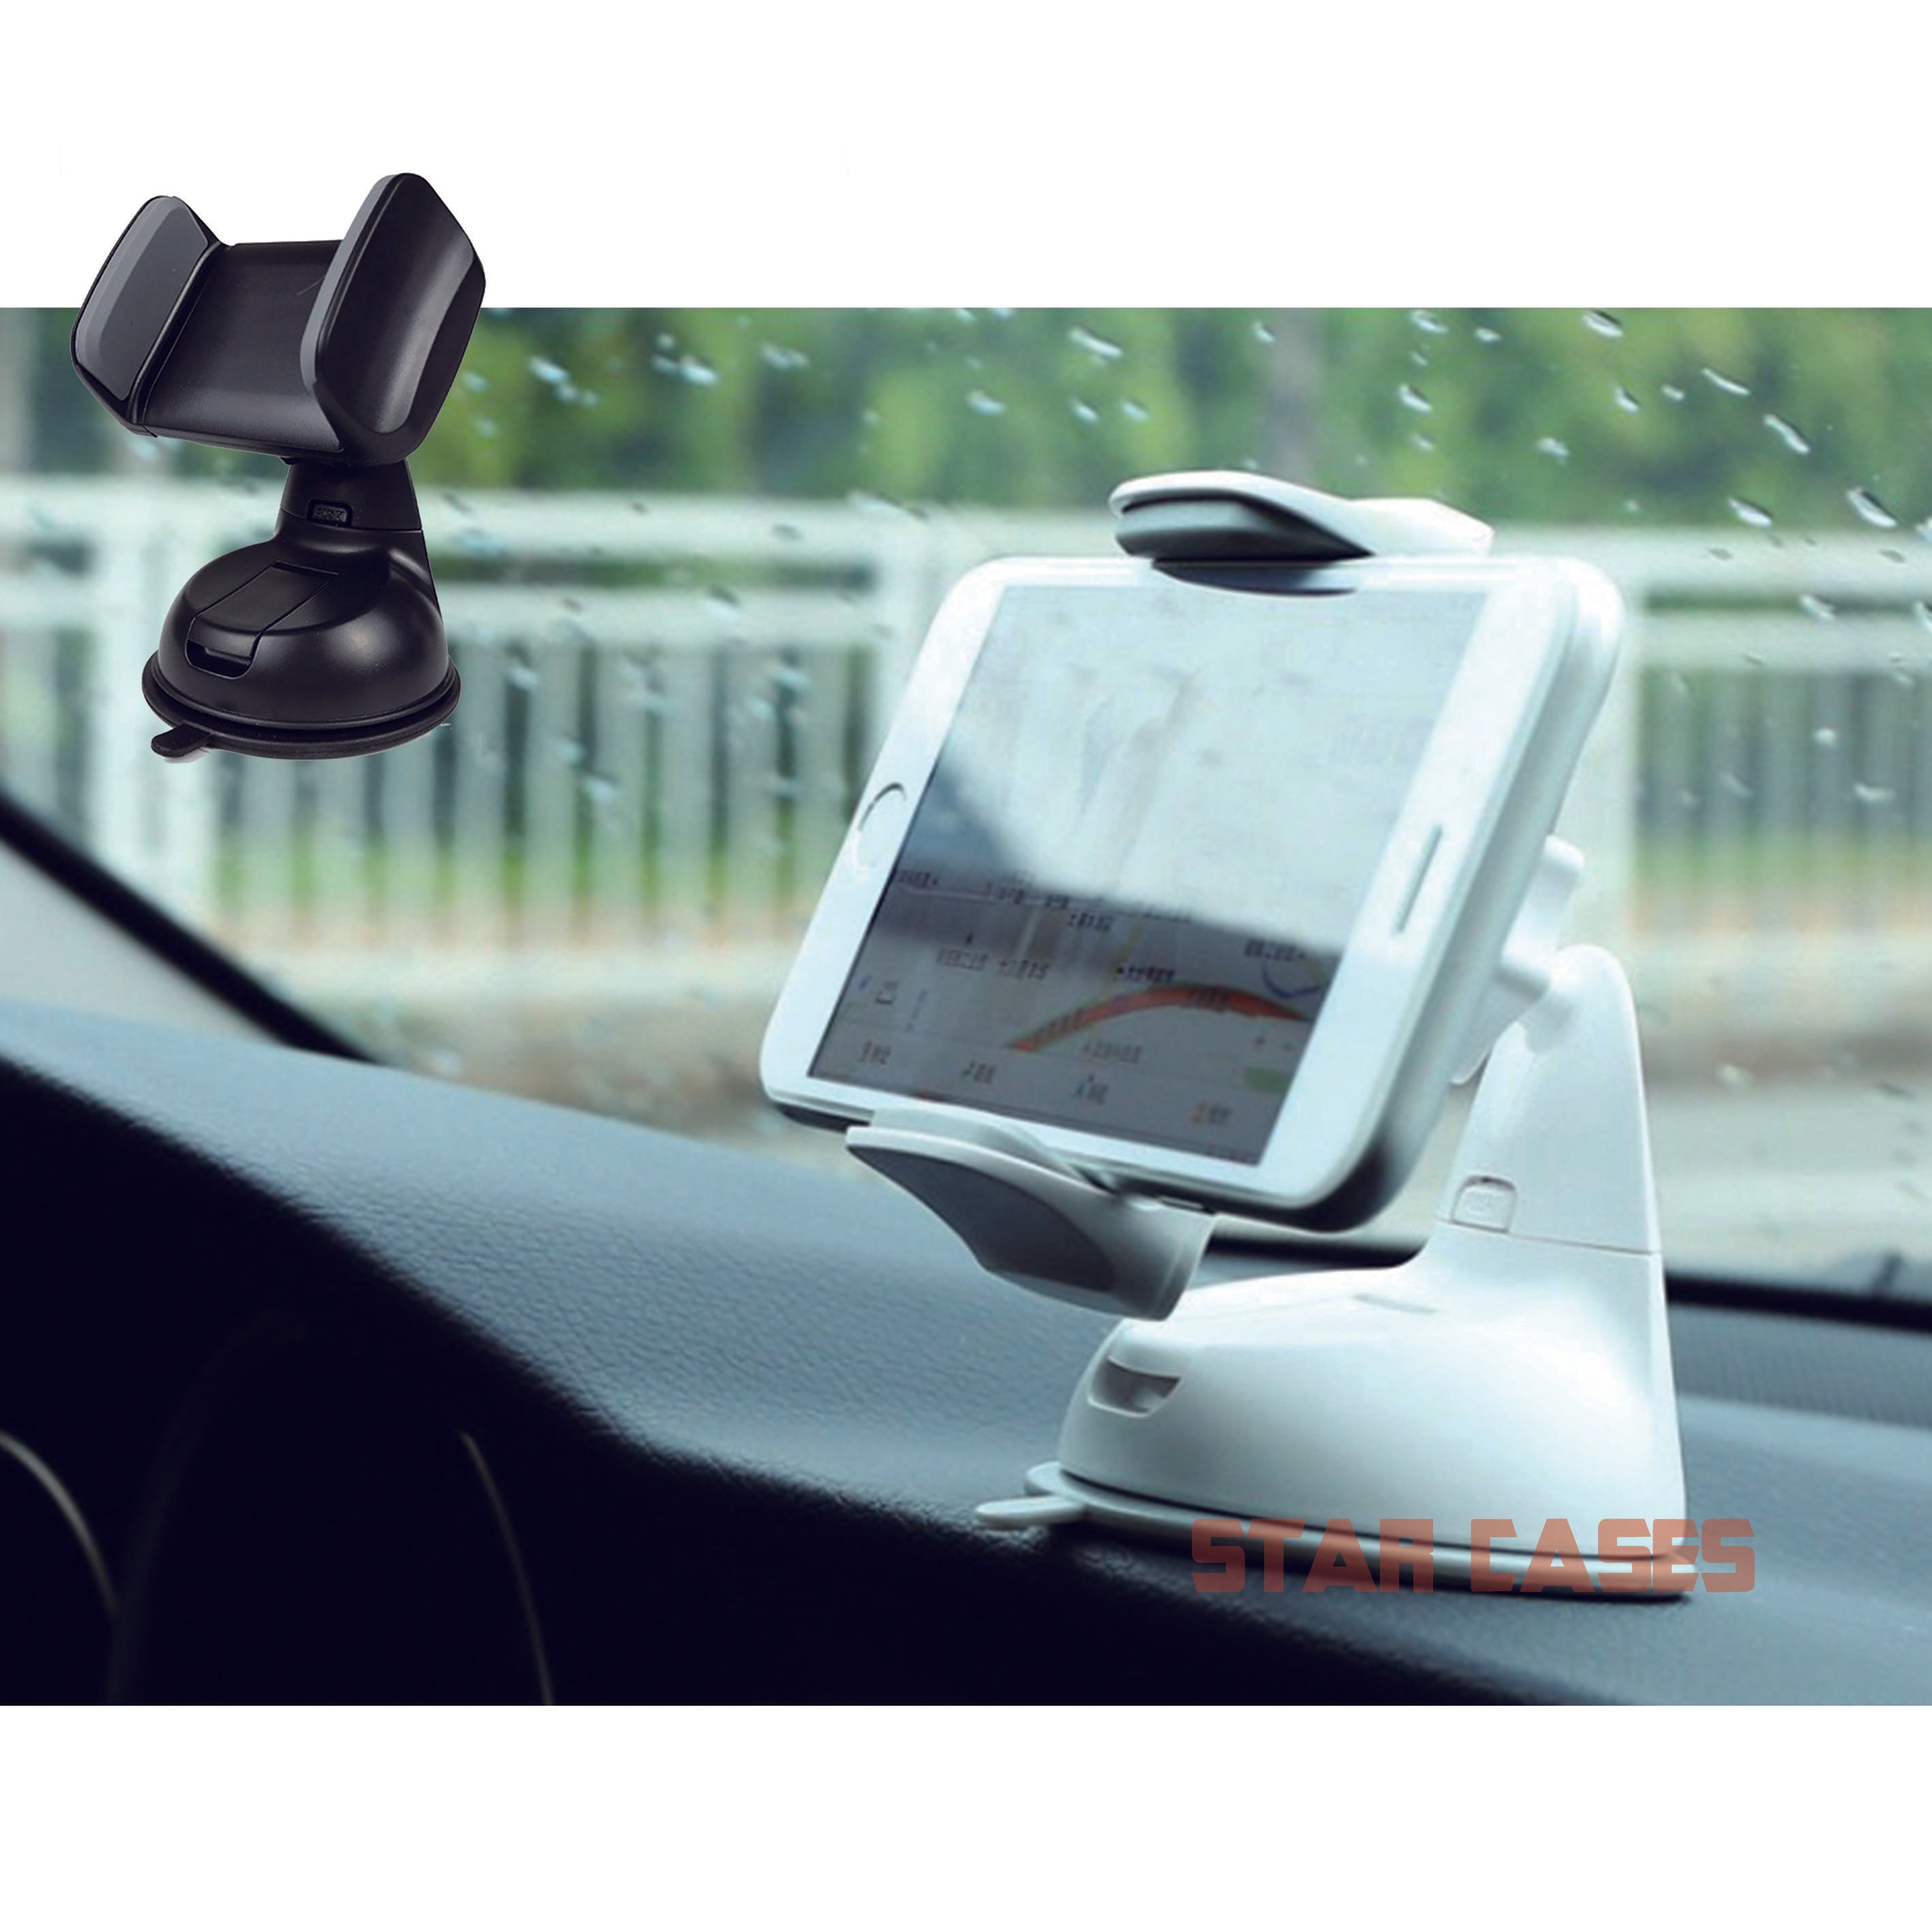 Universal Compact Car holder for Dashboard and Wind Shield